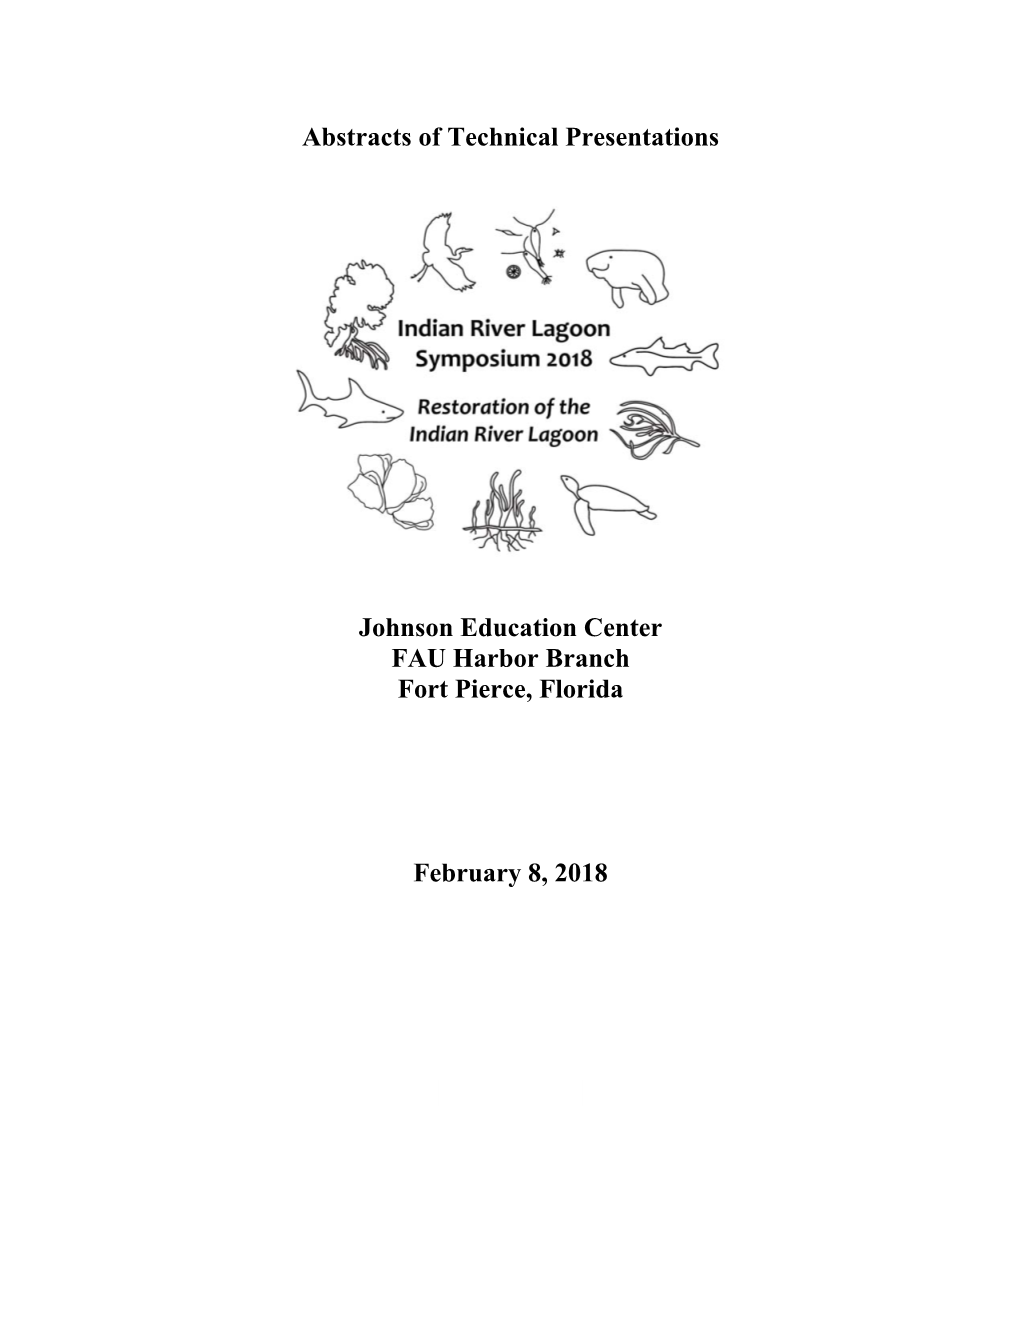 Abstracts of Technical Presentations Johnson Education Center FAU Harbor Branch Fort Pierce, Florida February 8, 2018